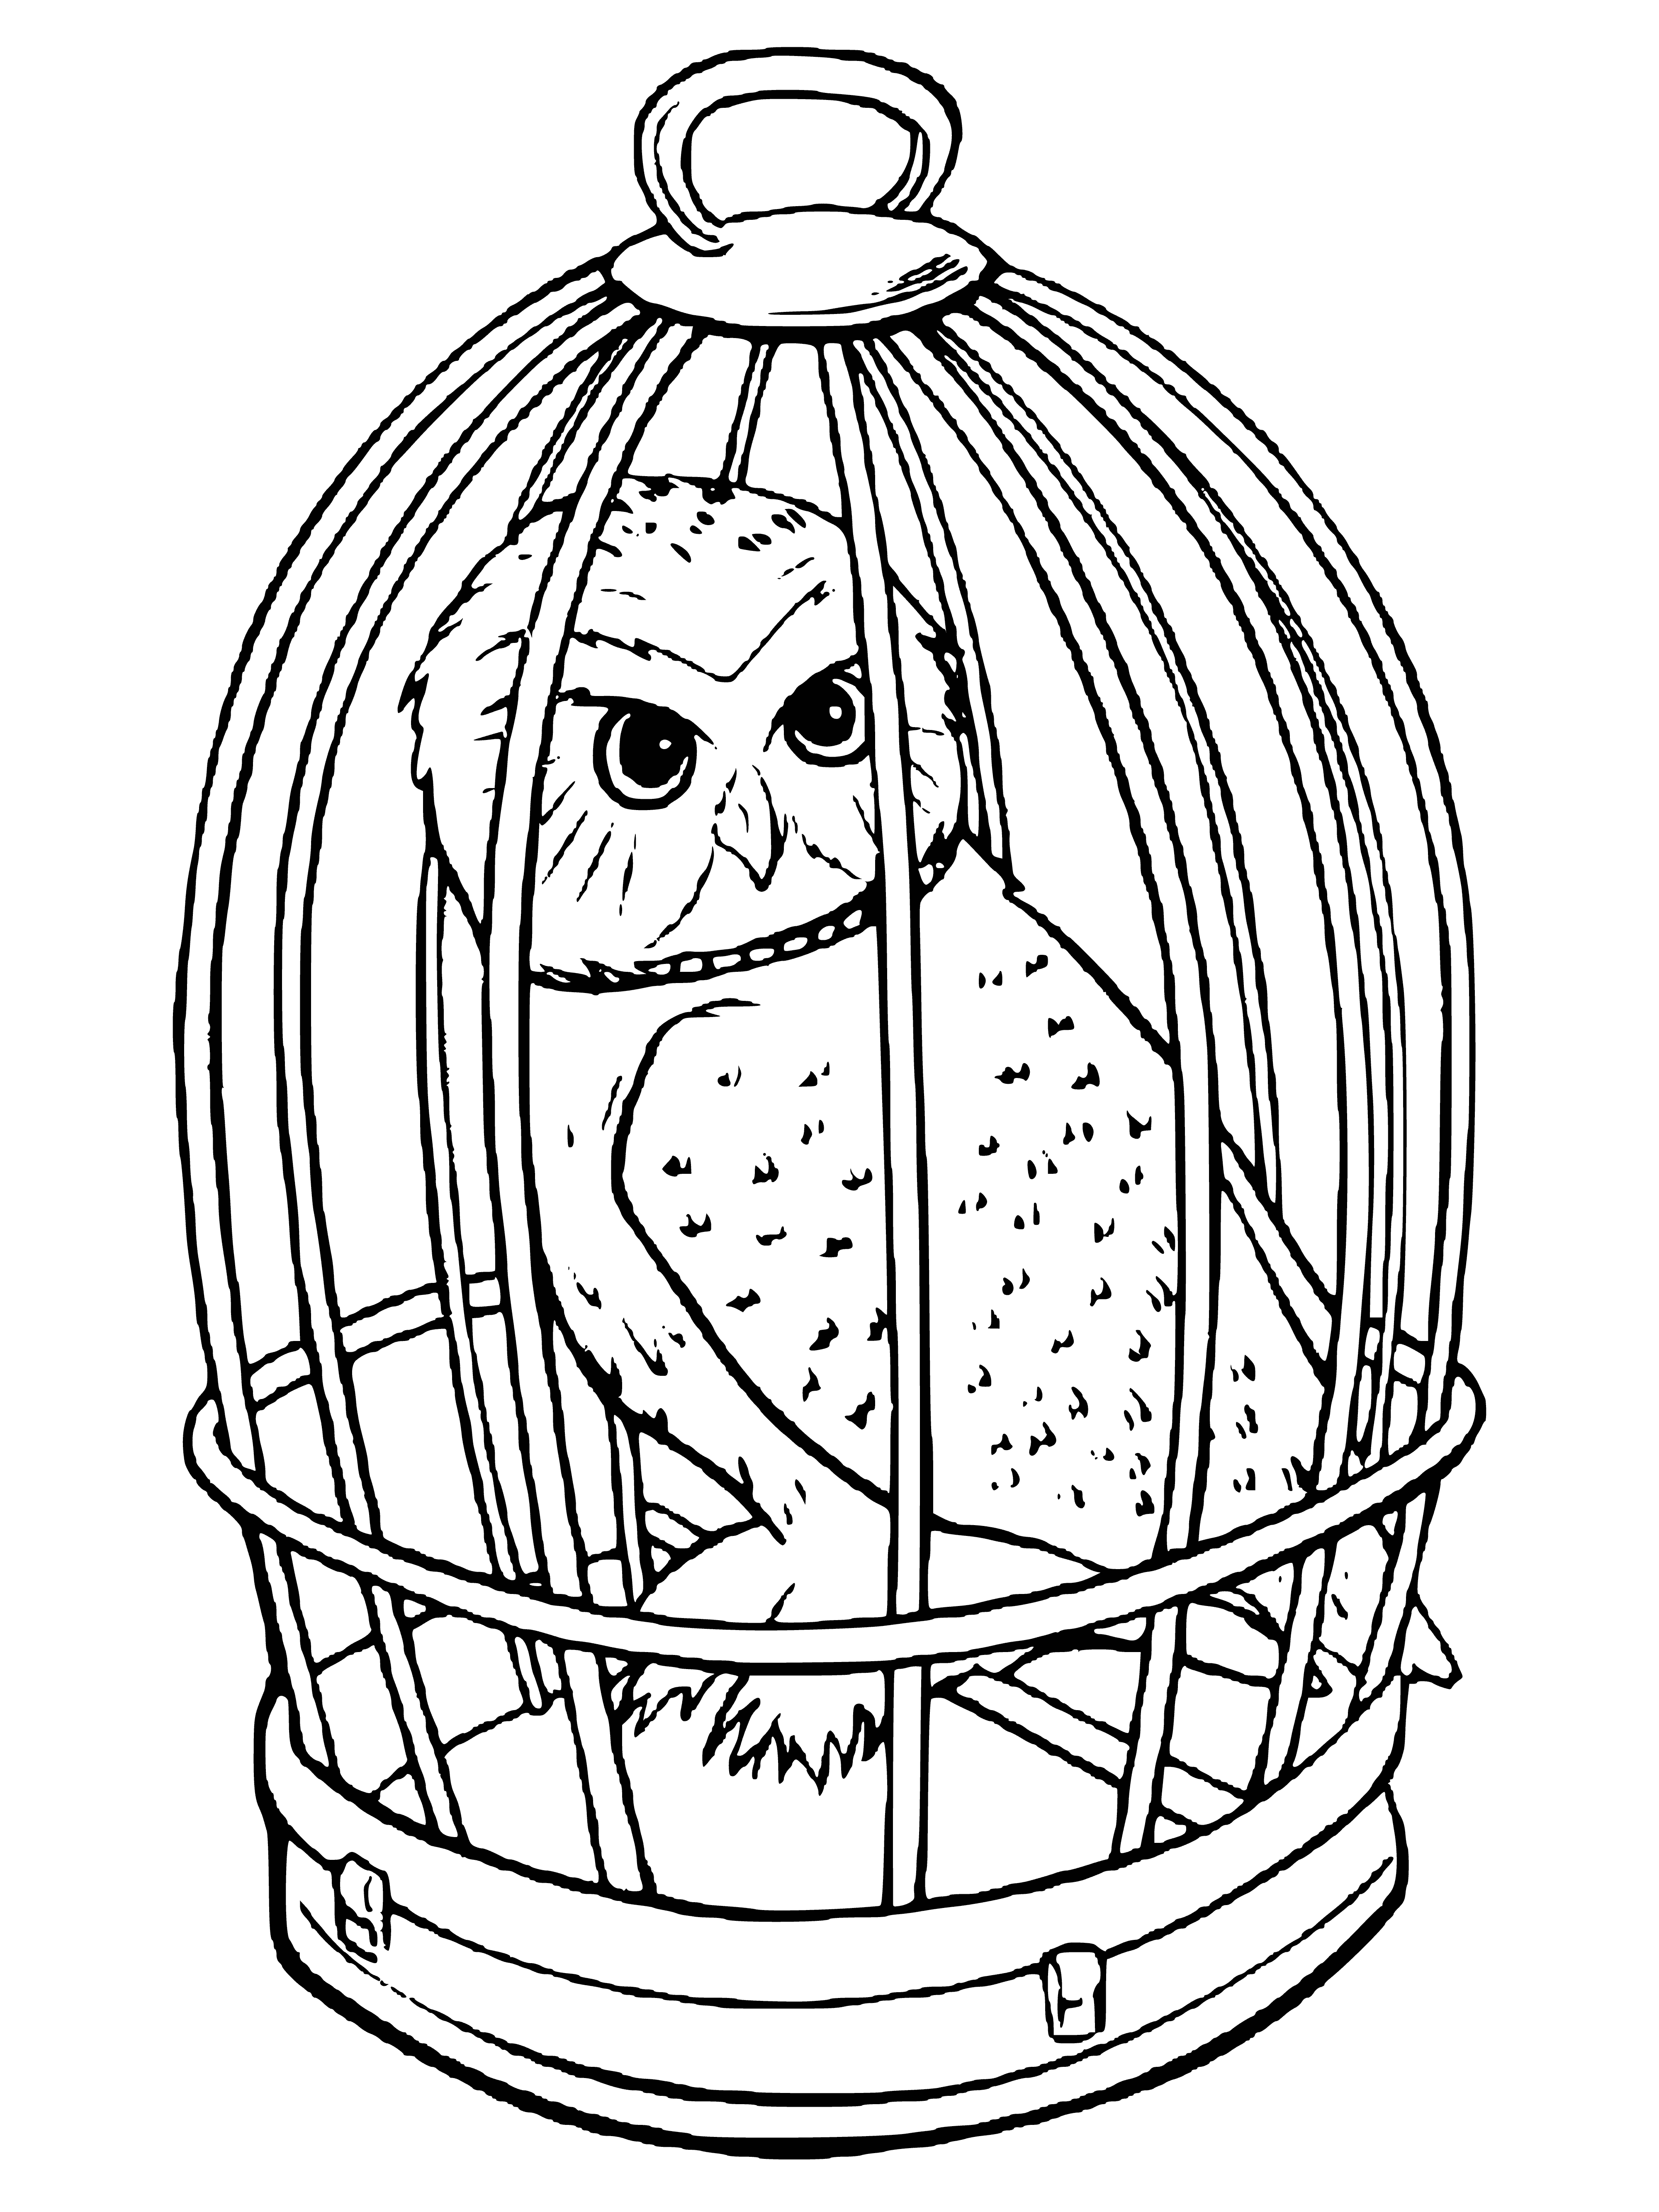 coloring page: Two owls spread their wings in a metal cage, a brown one perched above a white one.